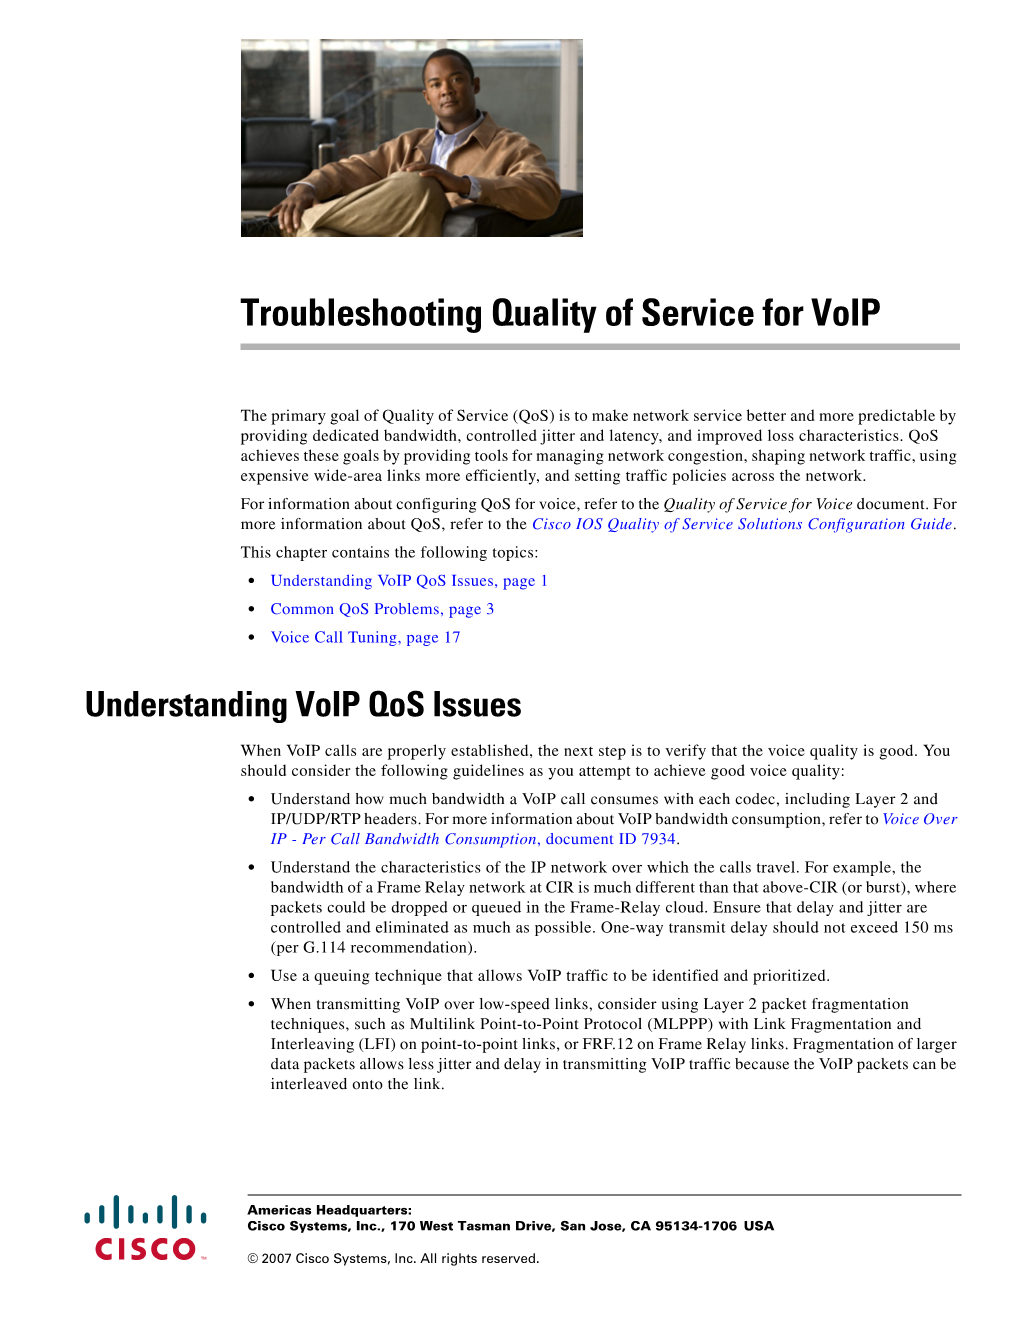 Troubleshooting Quality of Service for Voip